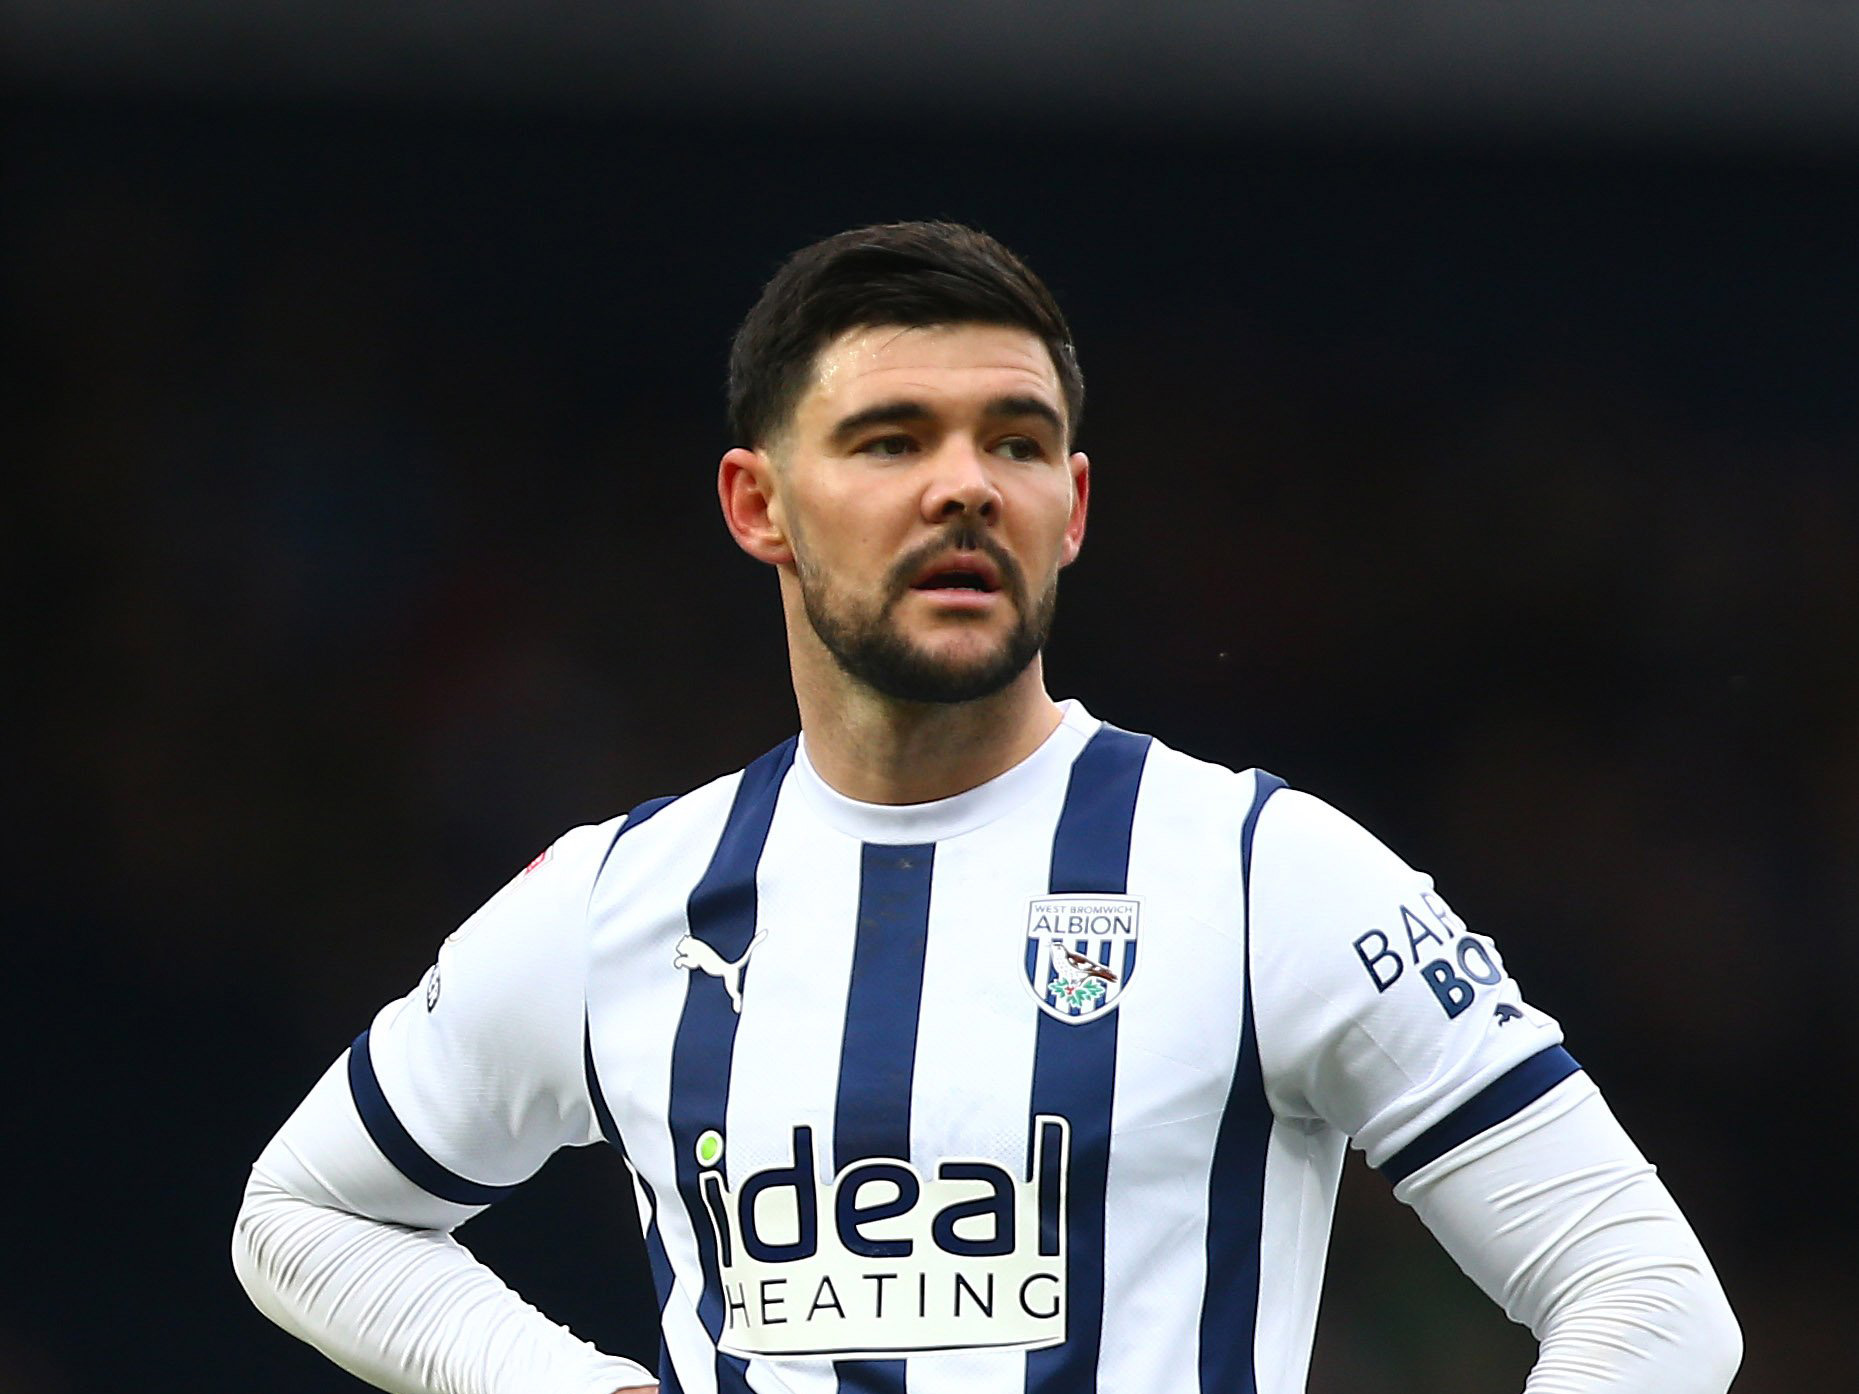 Alex Mowatt in action for Albion wearing the home kit 